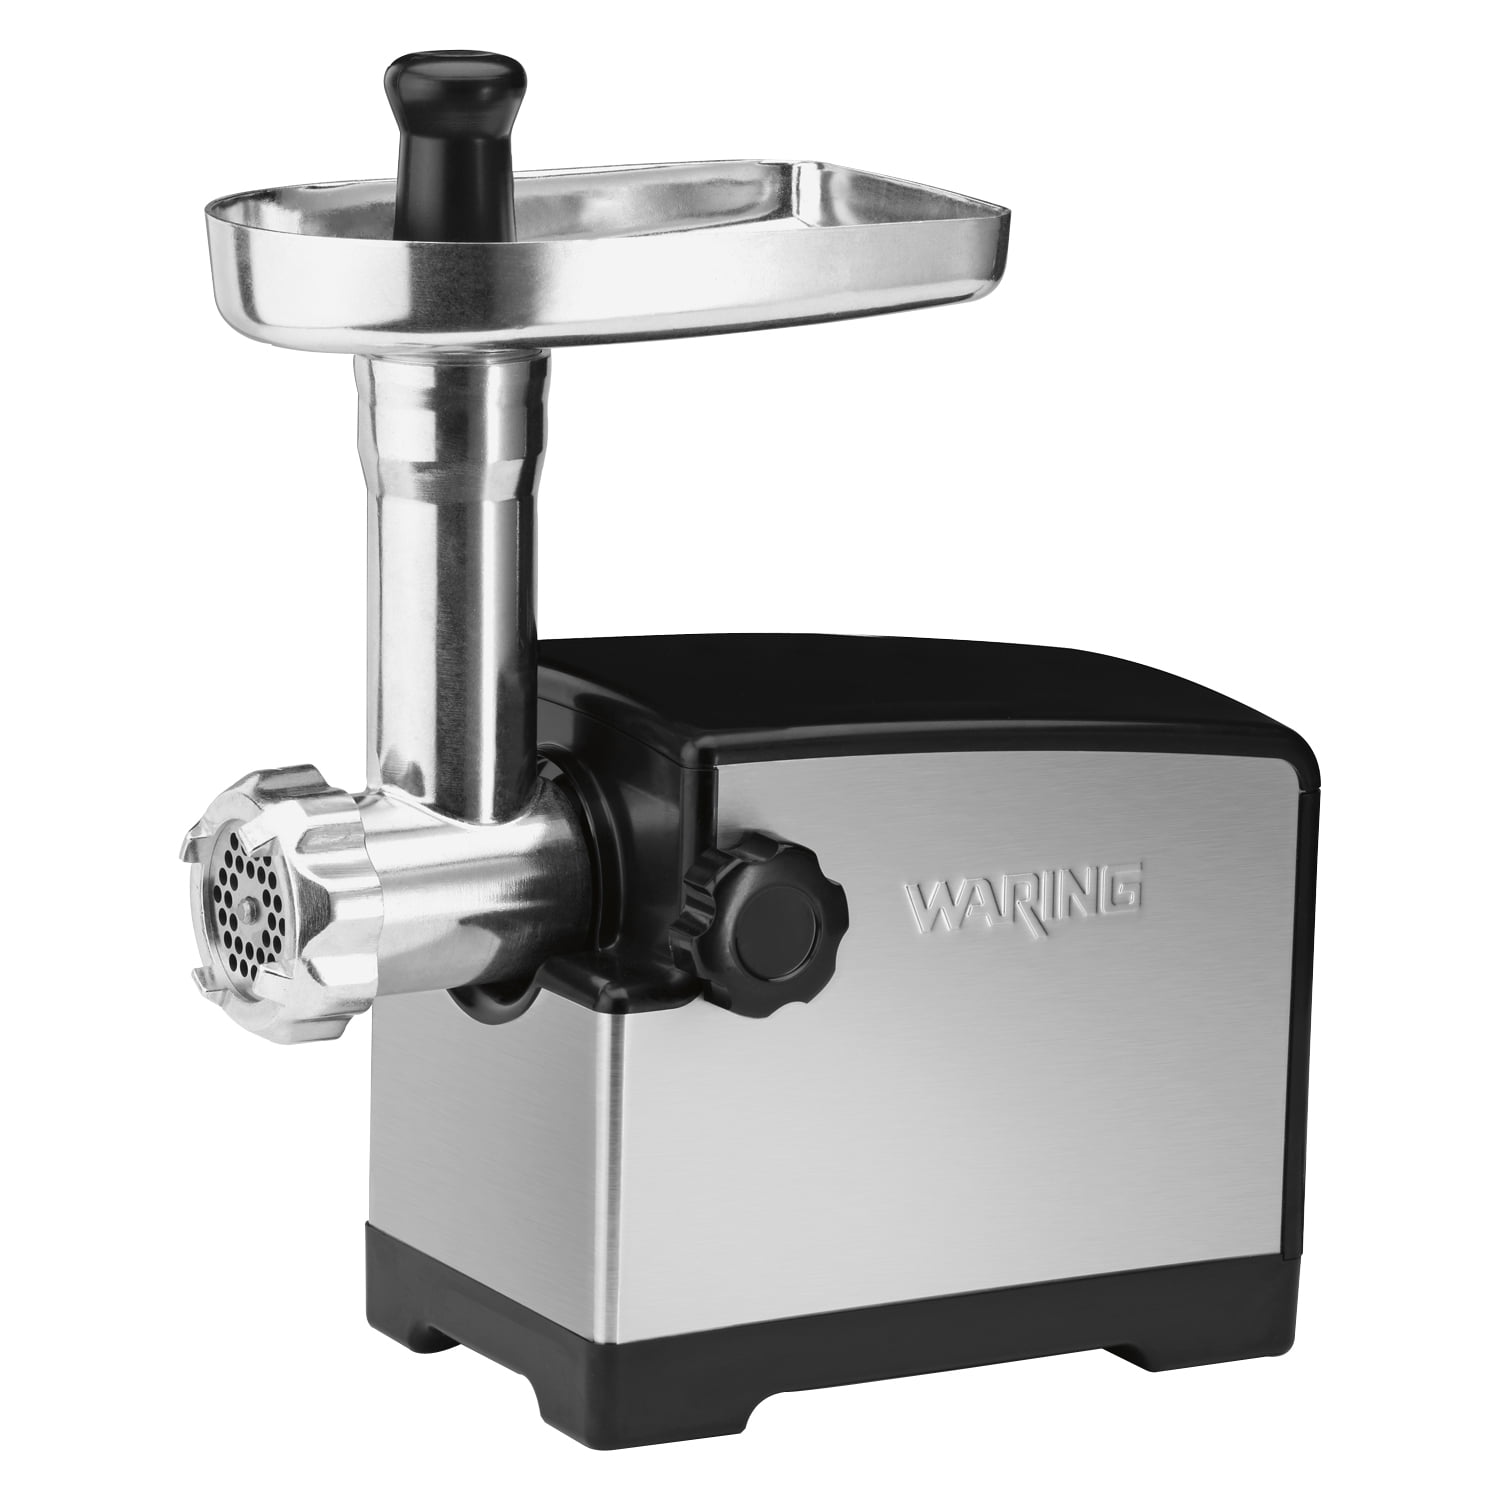 Waring Pro MG855 Professional Die-Cast Metal Housing Meat Grinder Brushed Stainless Steel 